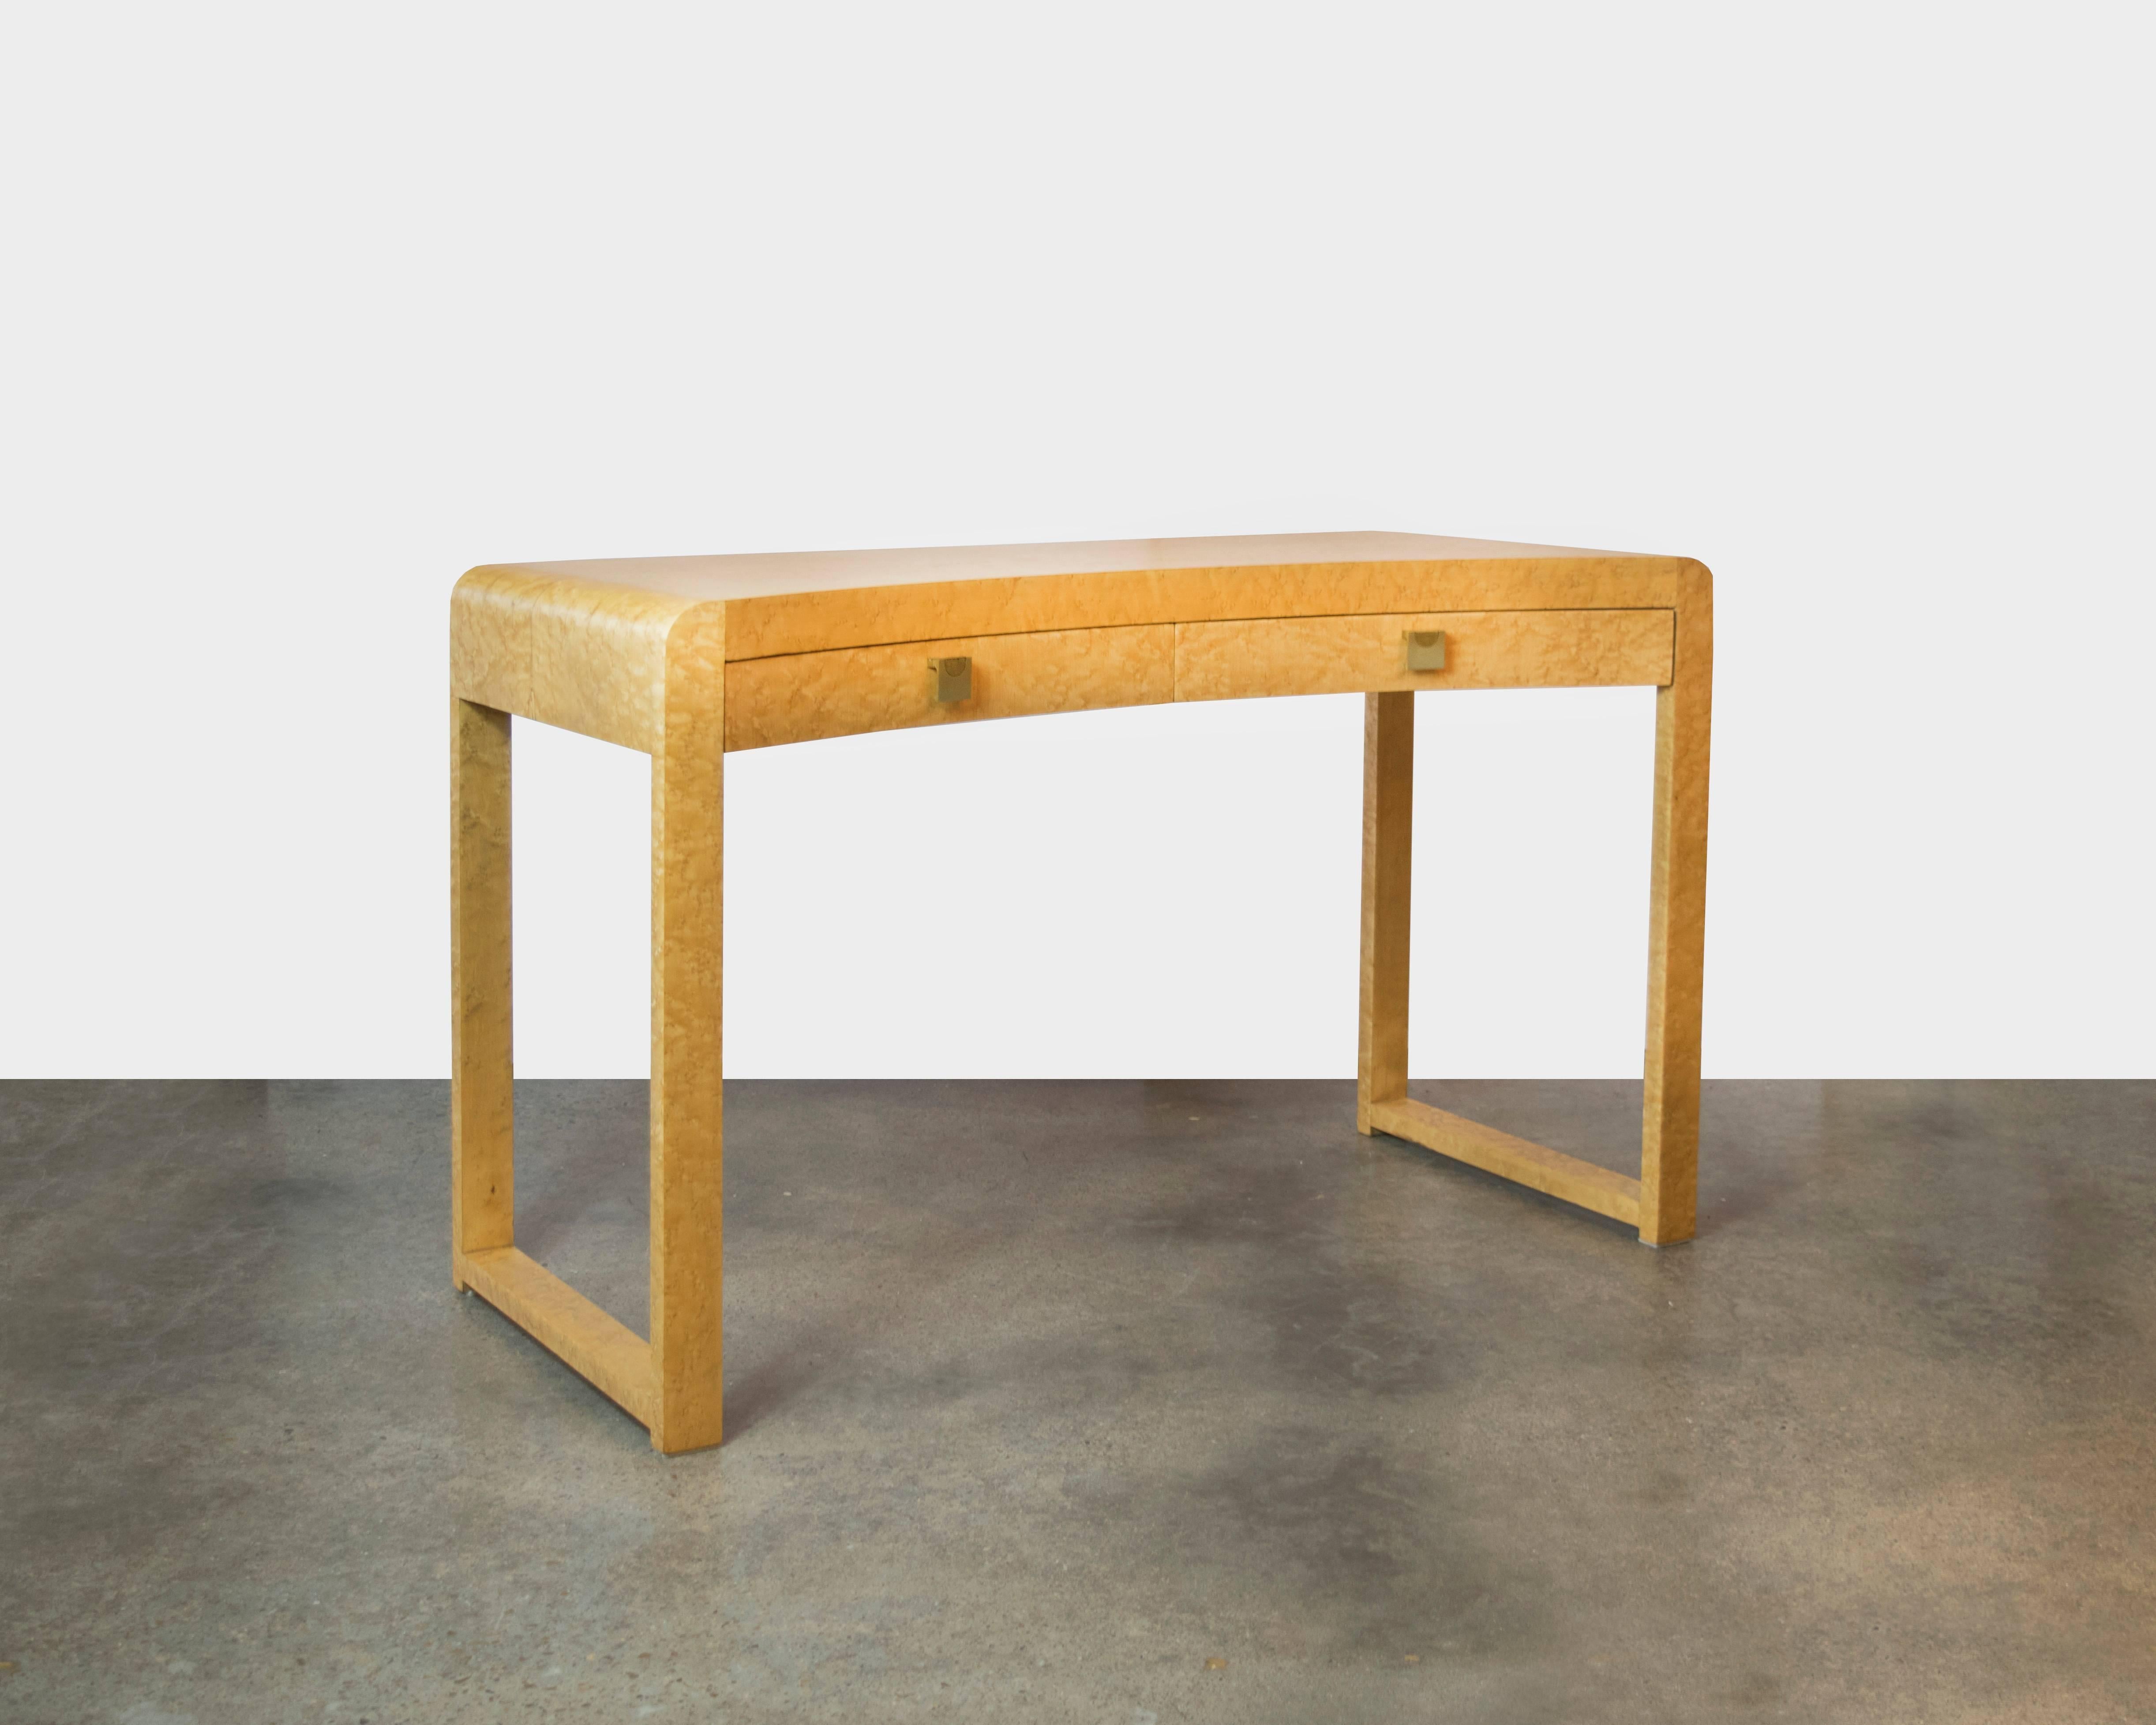 An elegant desk or vanity in the style of Milo Baughman. This piece has a curved front which provides an interesting design detail. The top piece rolls down in a bentwood style eliminating seams on the top of the table. Beautiful detailing in the